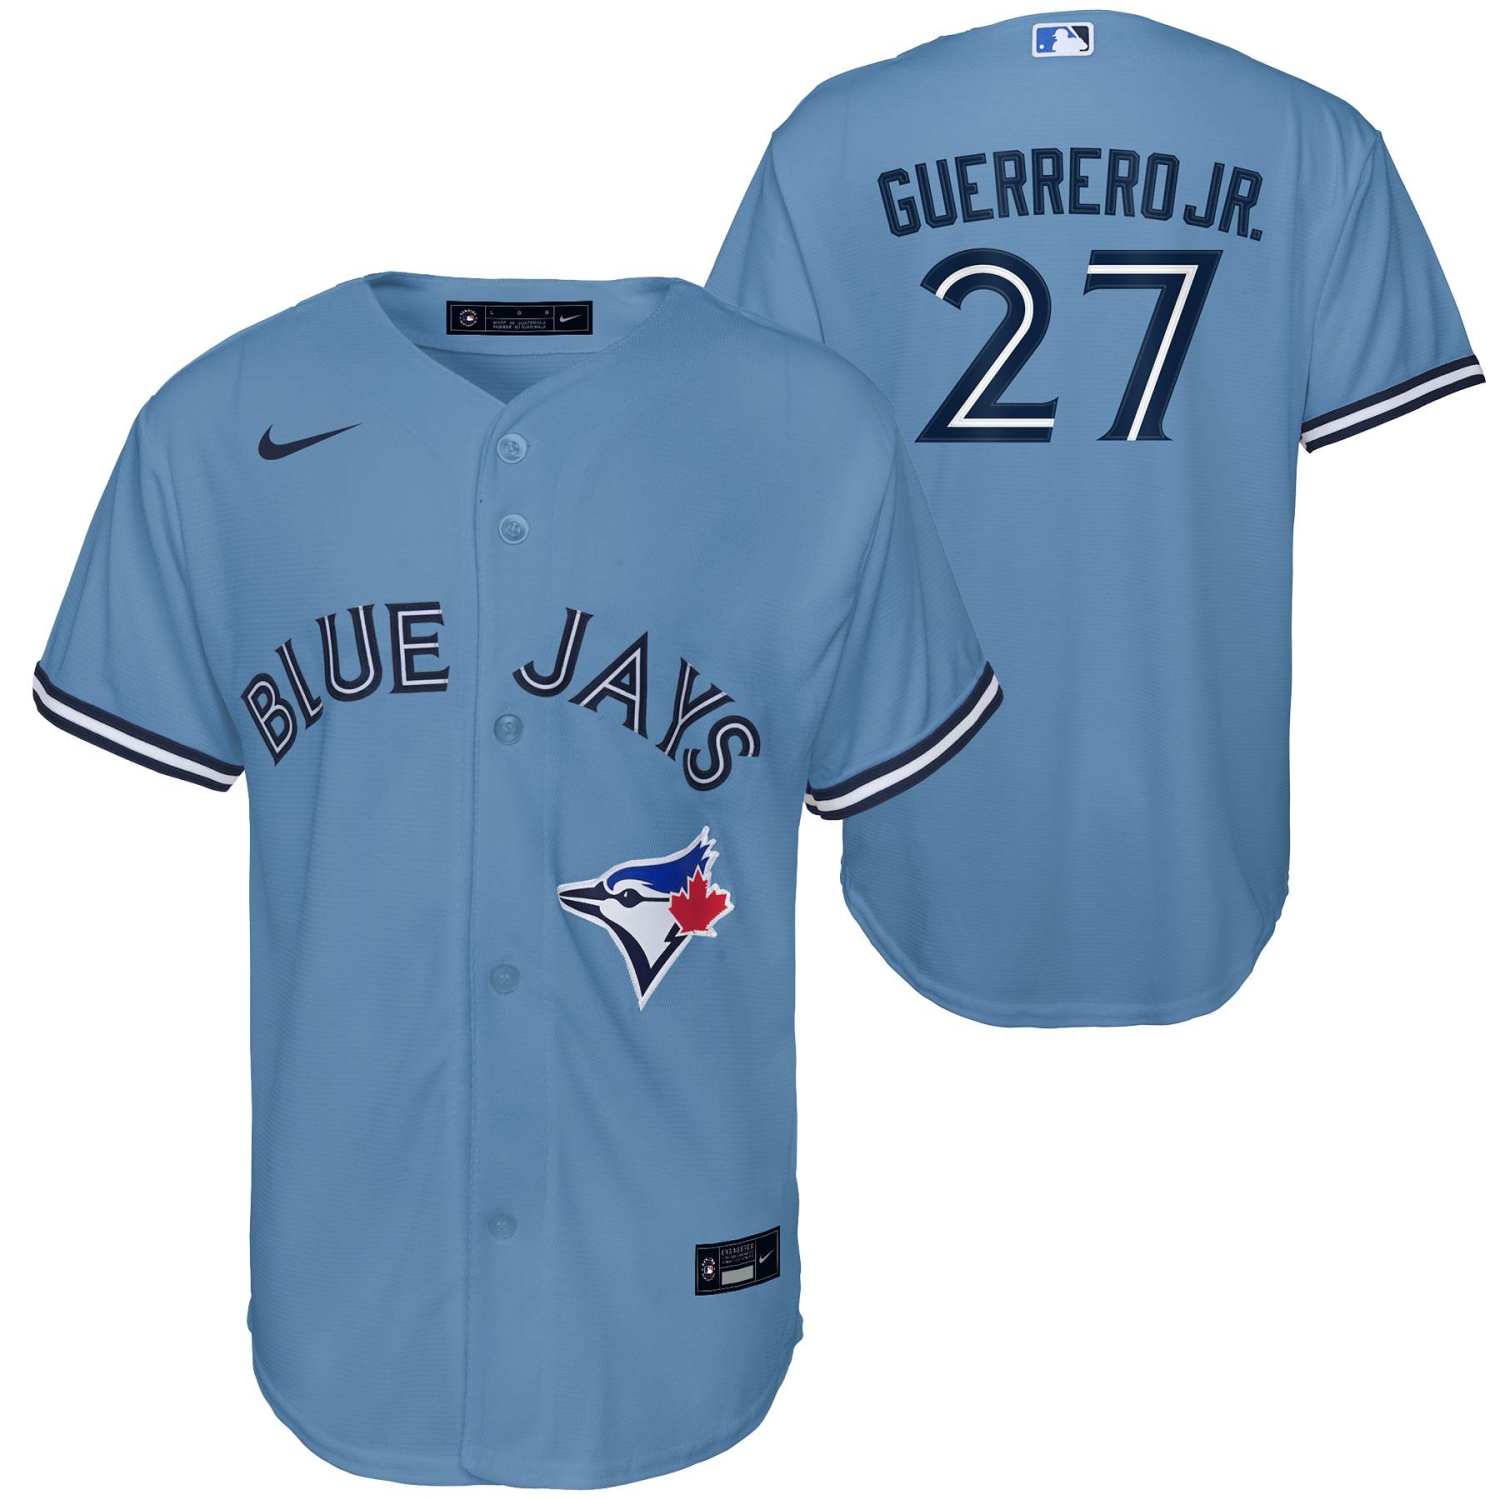  Outerstuff Vladimir Guerrero Jr. Toronto Blue Jays Youth Cool  Base Replica Alternate Jersey - Size Youth X-Large (18/20) : Sports &  Outdoors